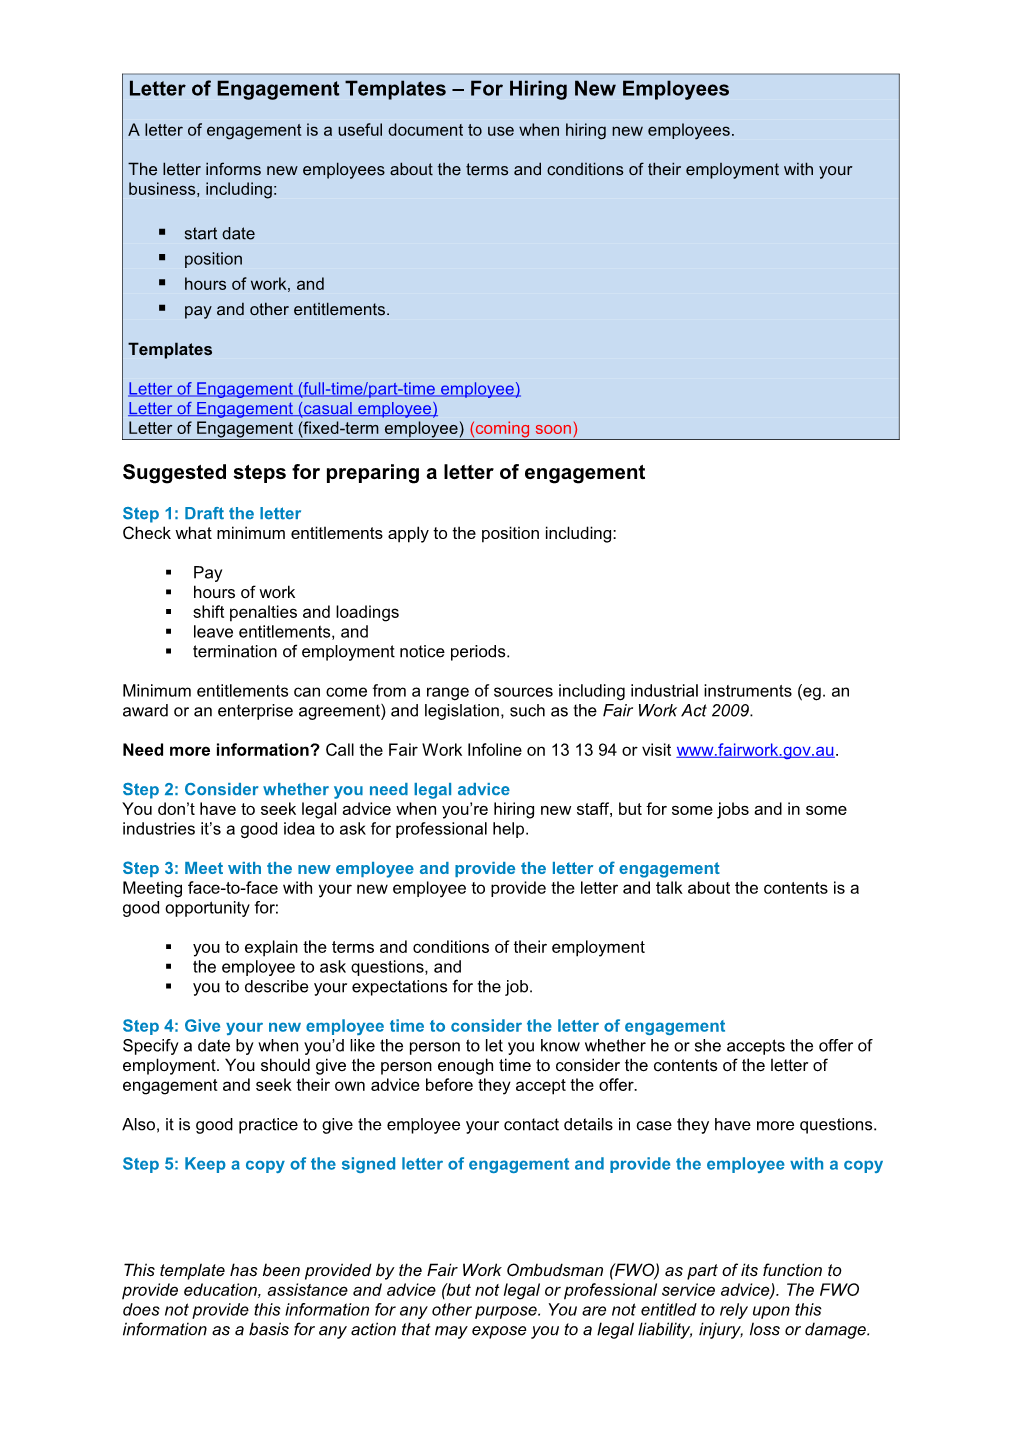 Template Letter of Engagement - Full-Time/Part-Time Employee